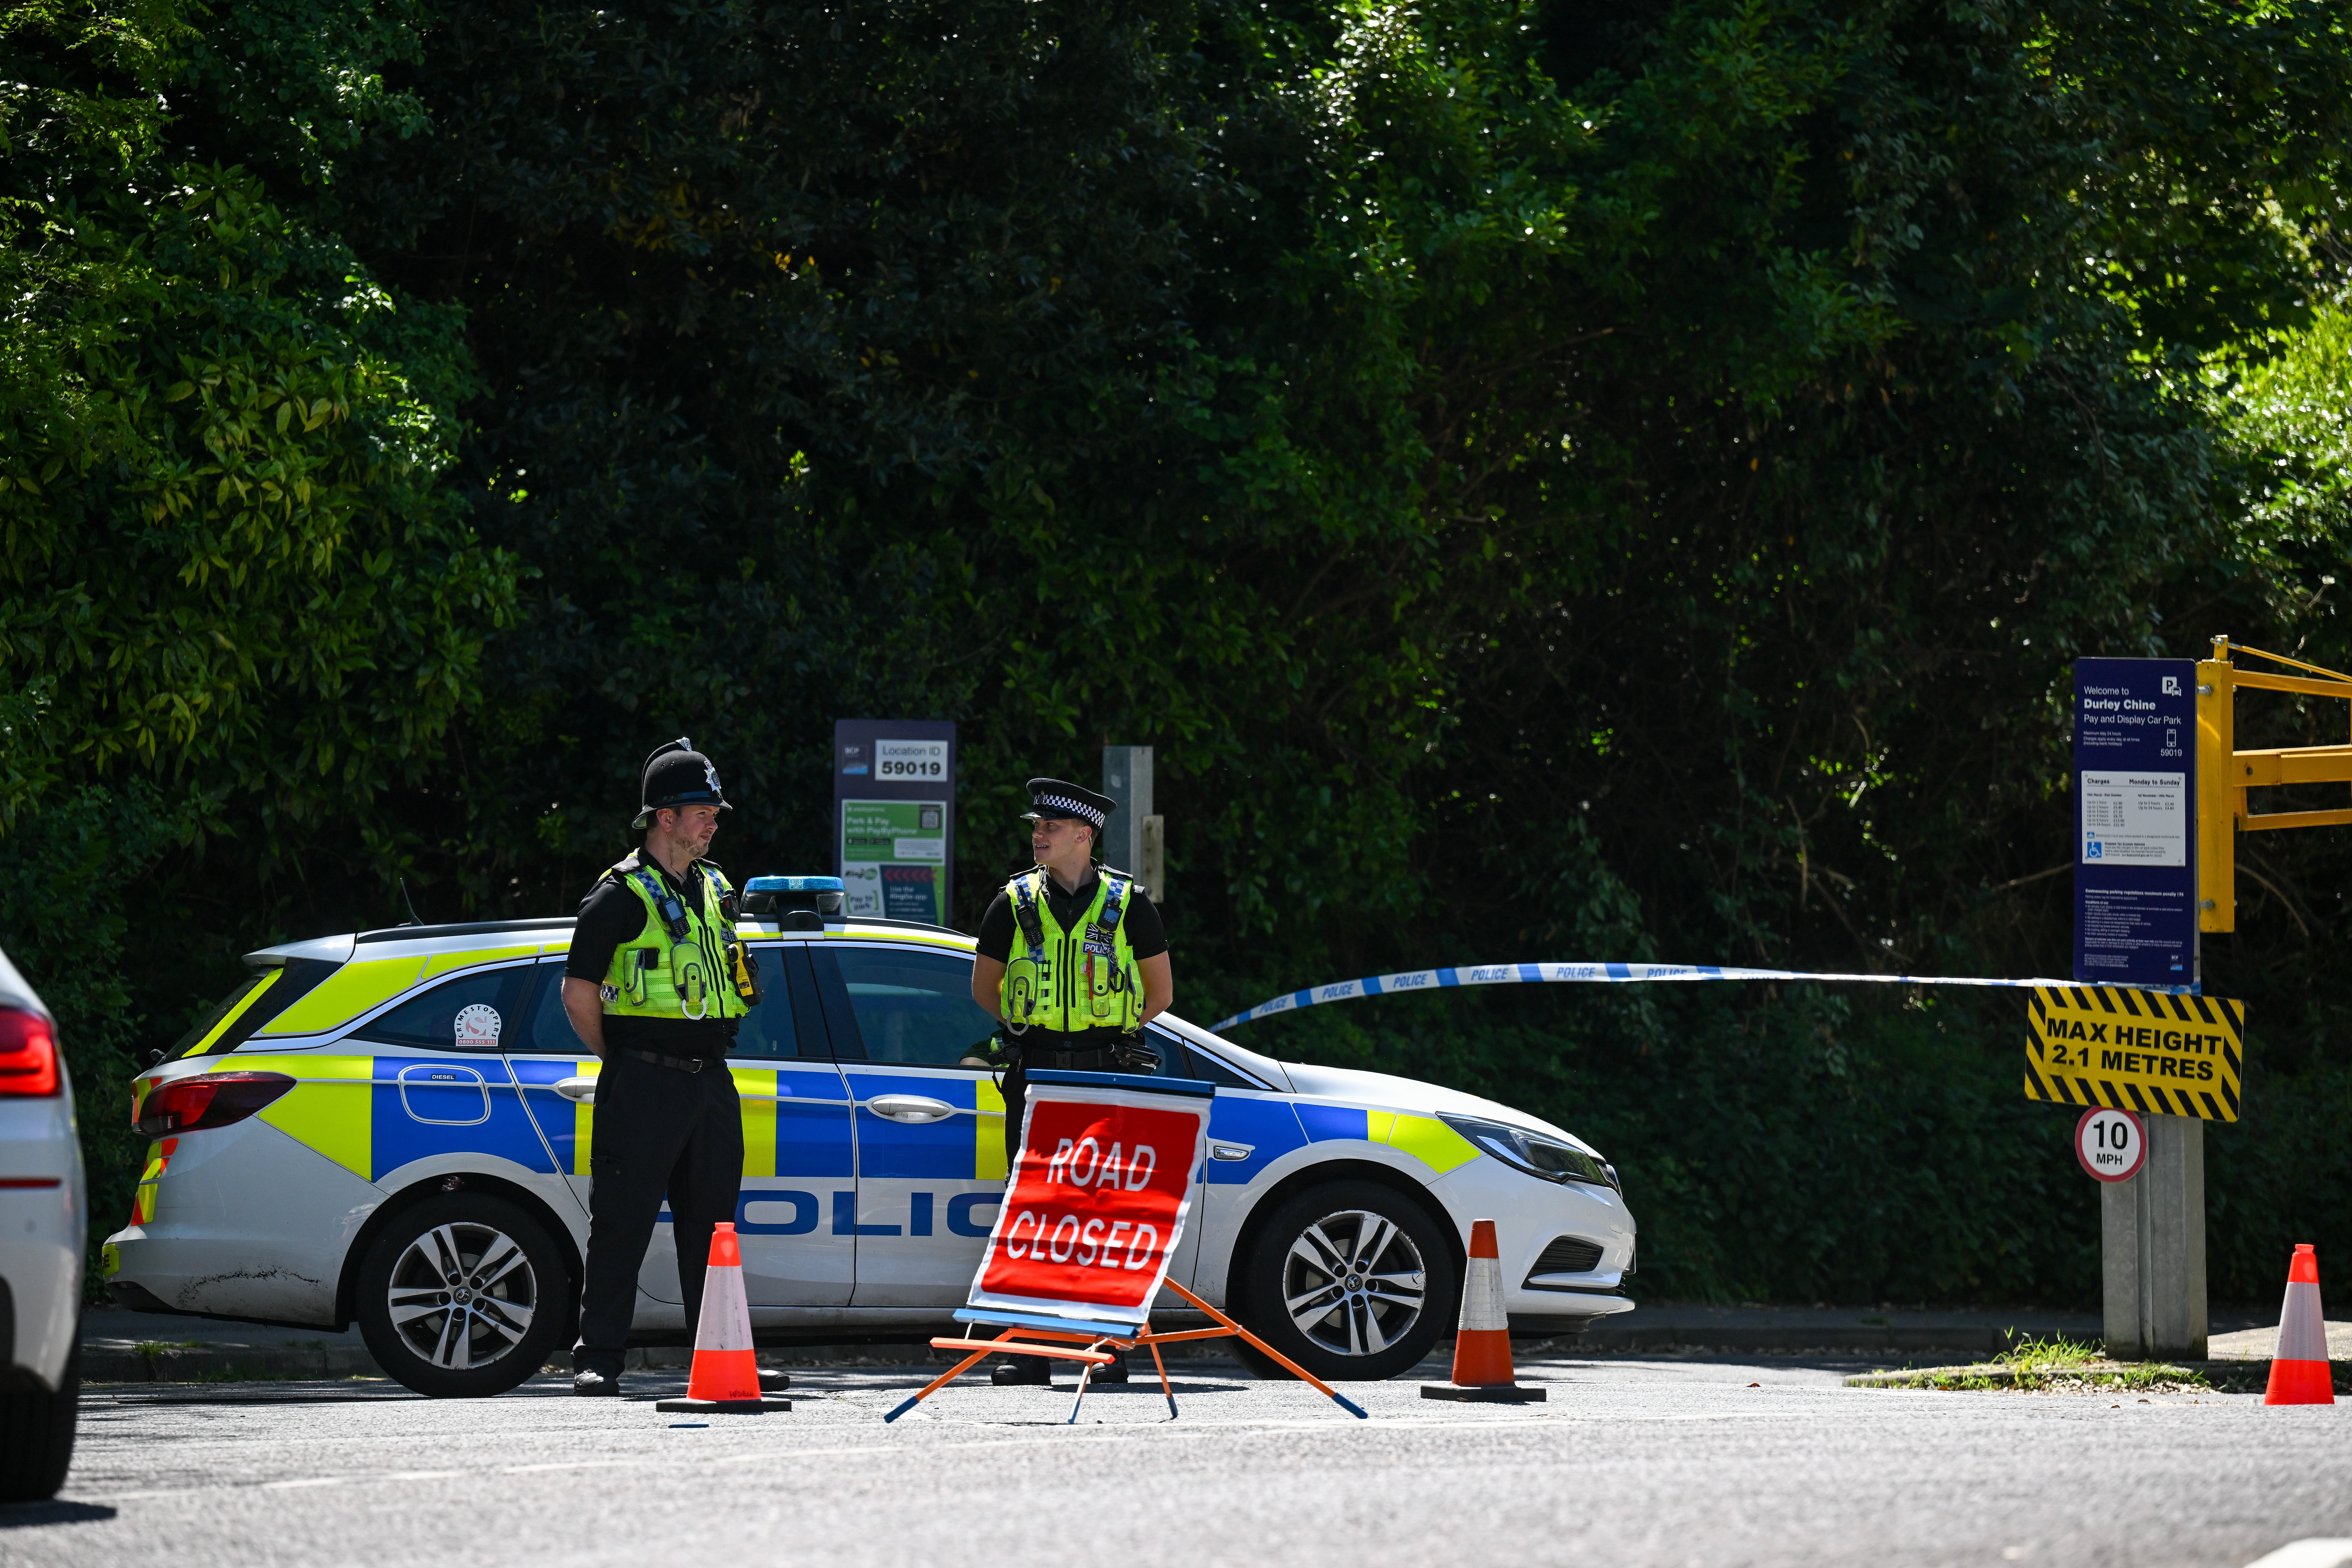 Police have blocked a road to the beach on Saturday as investigations continue